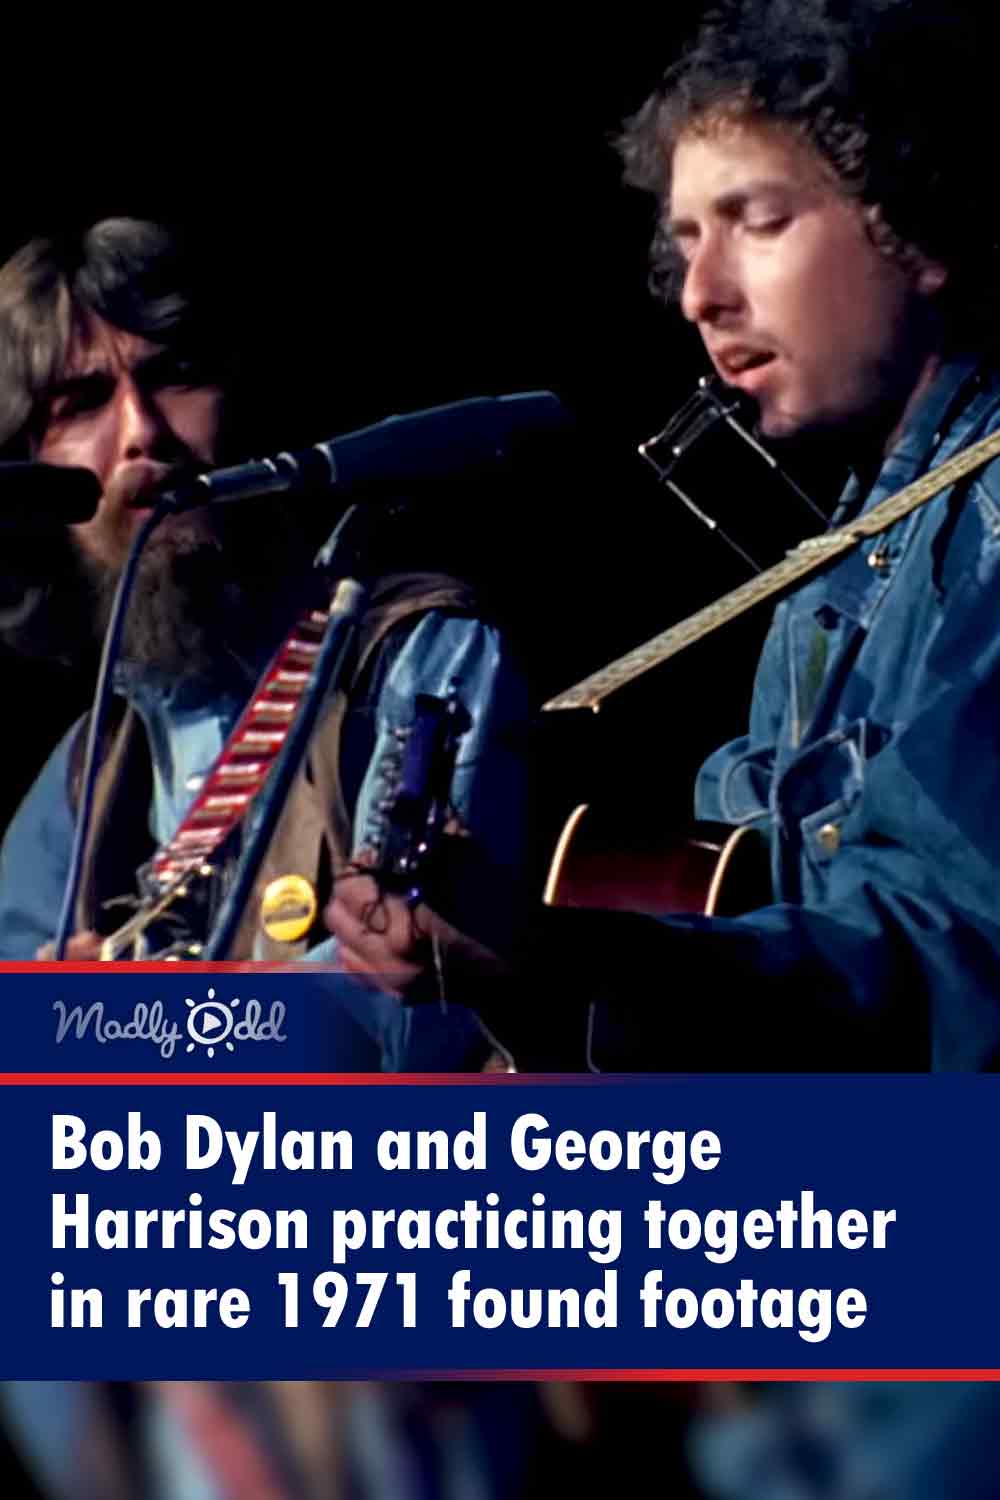 Bob Dylan and George Harrison practicing together in rare 1971 found footage